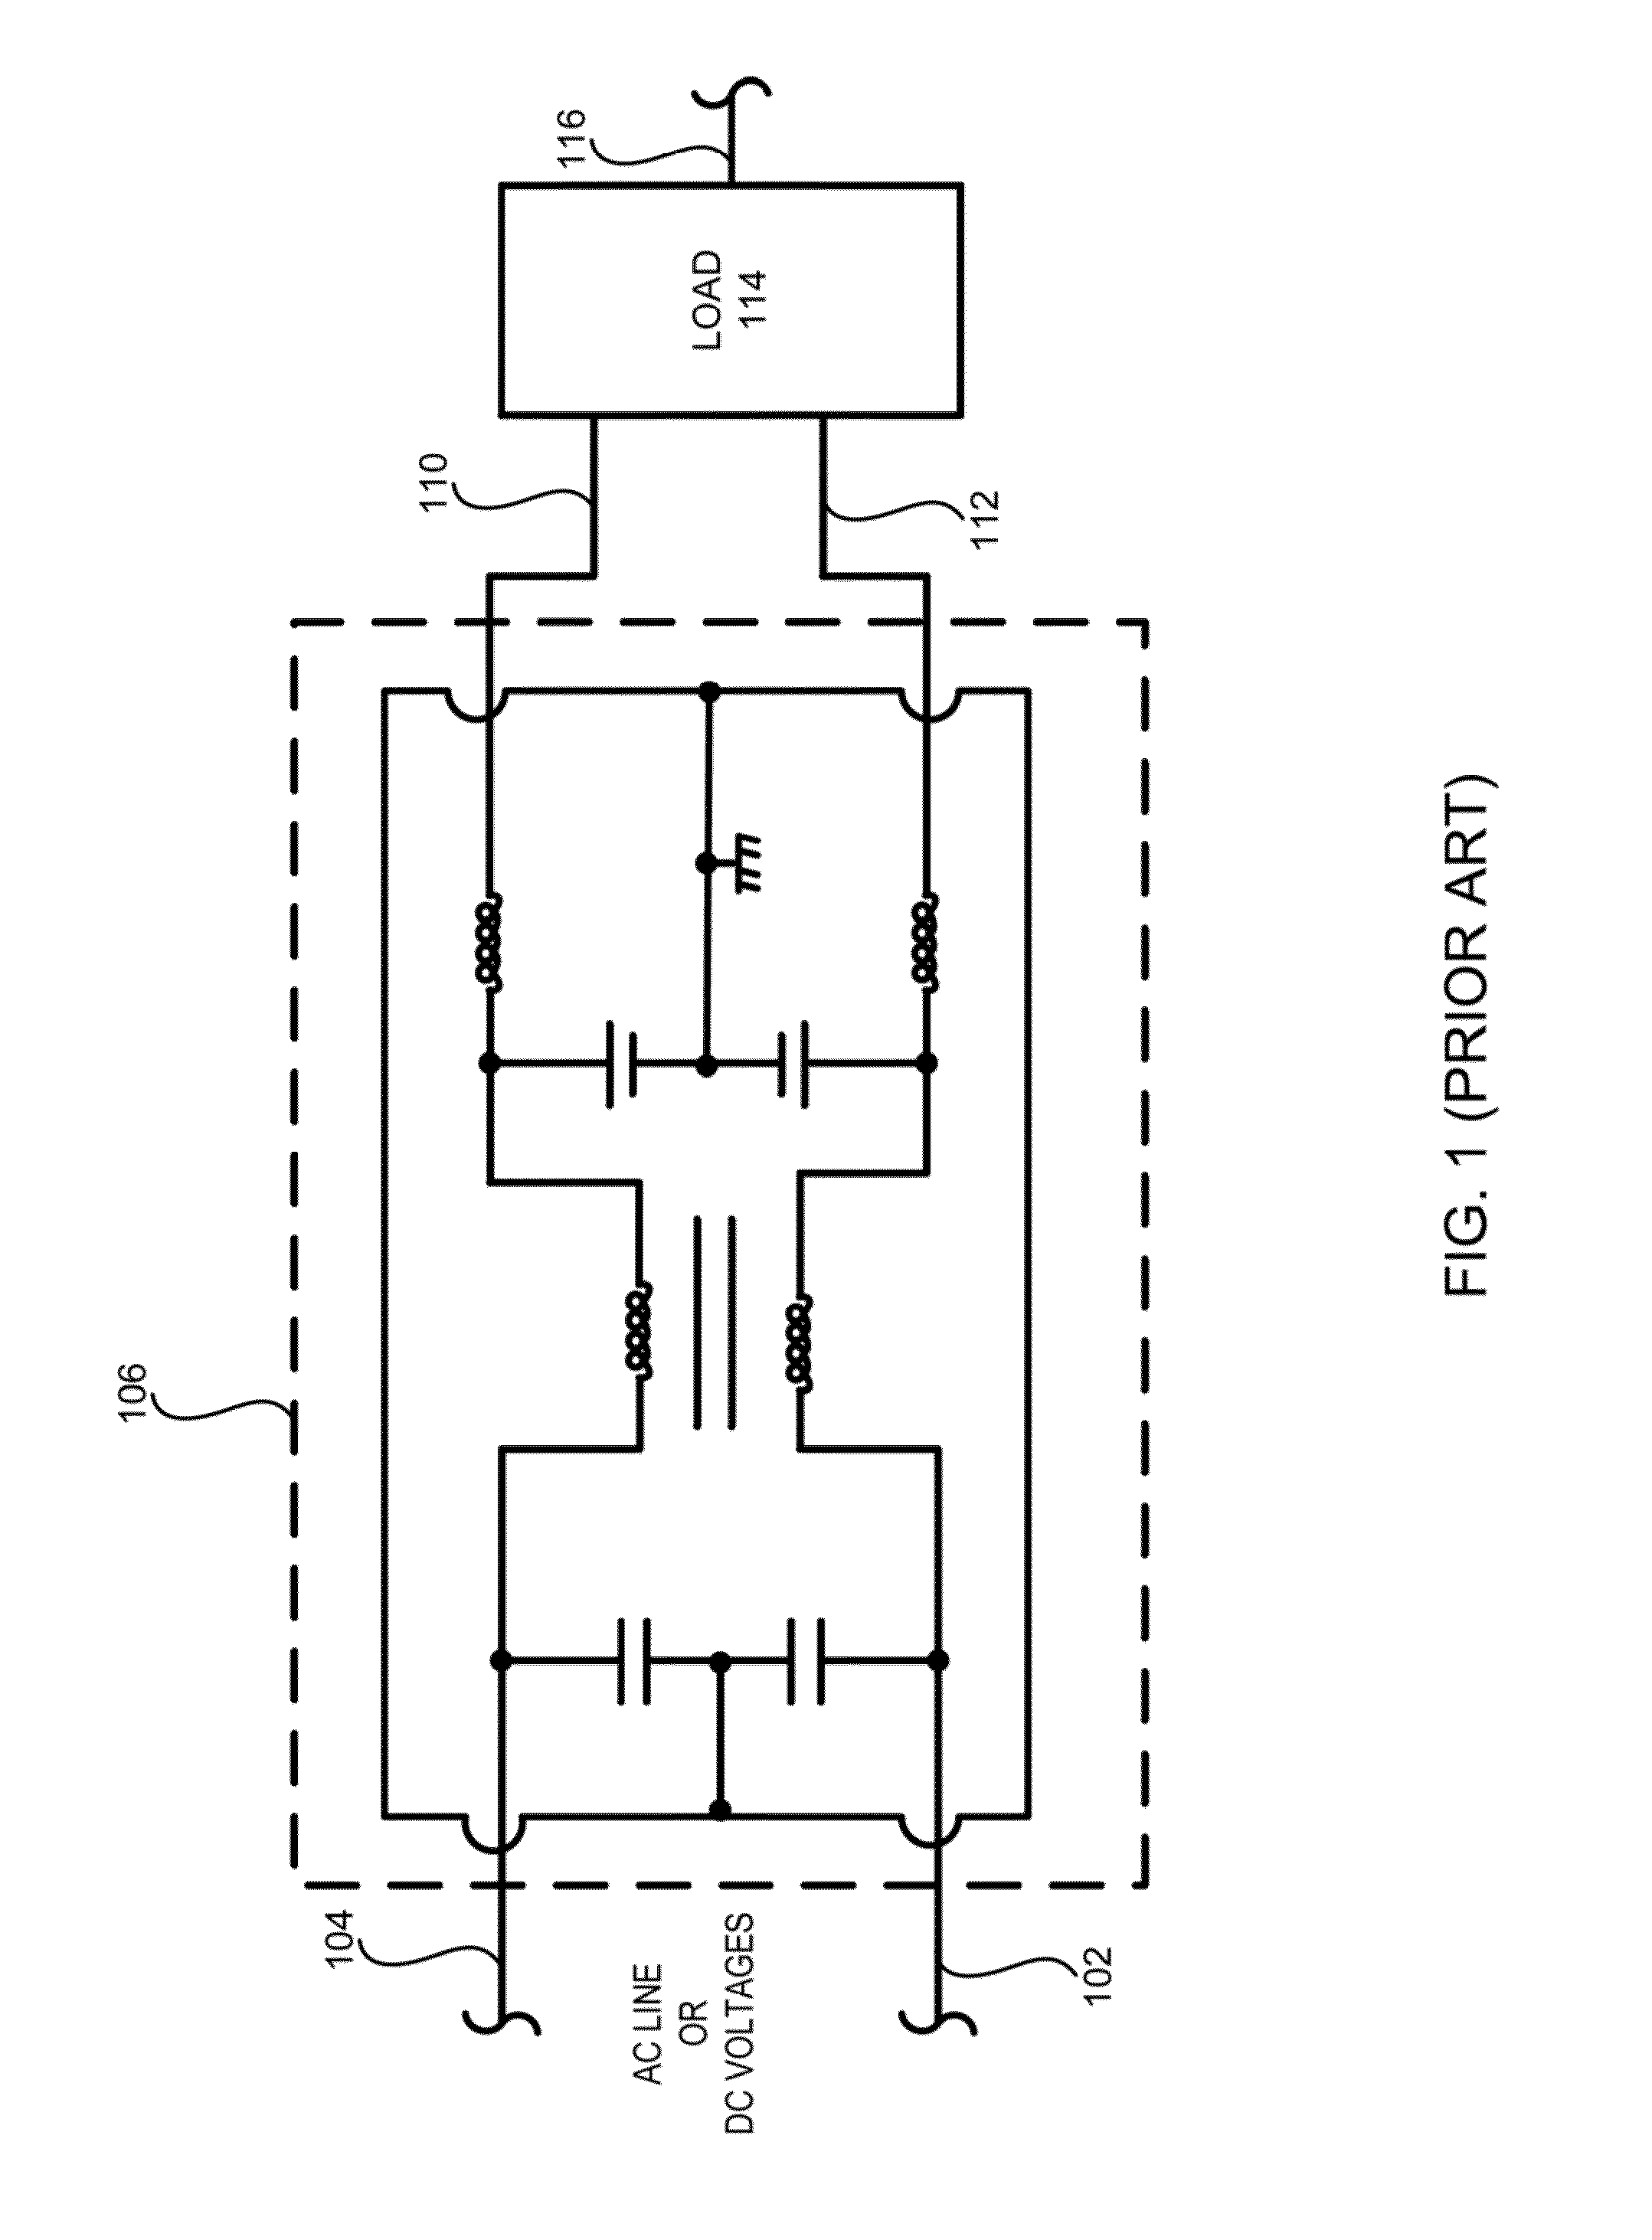 RF isolation for power circuitry